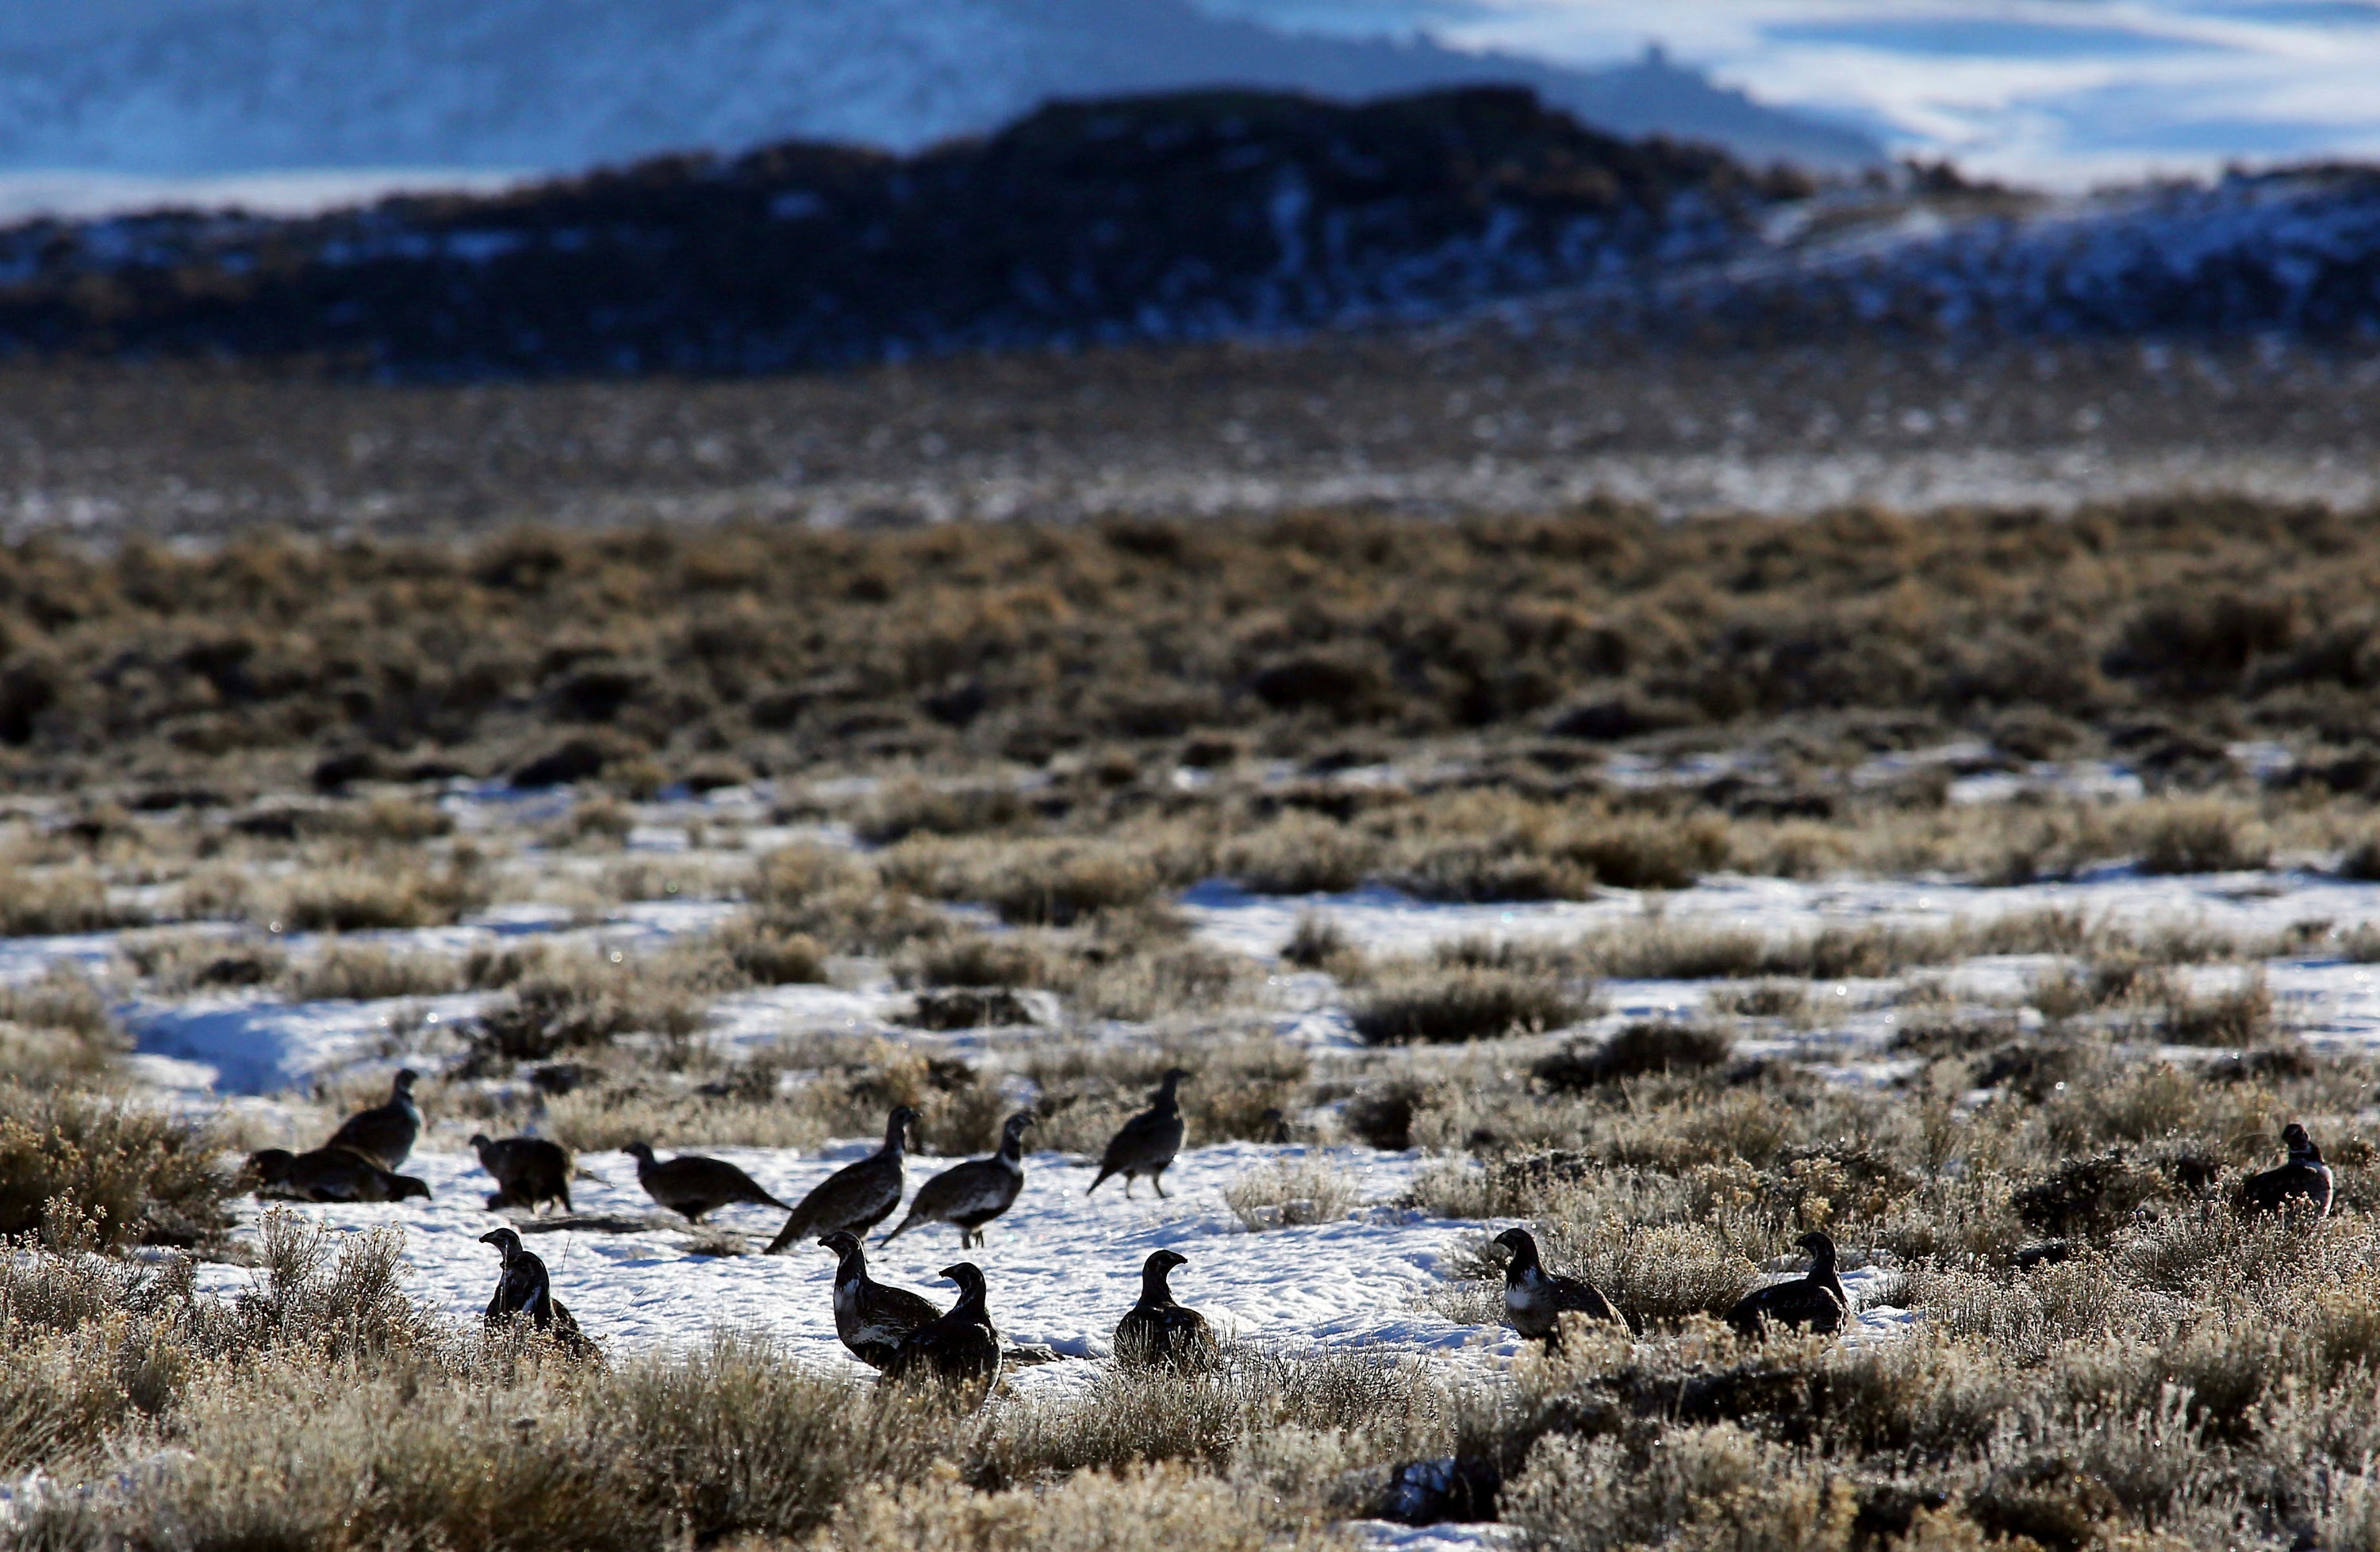 Wyoming holds 38 per cent of the world’s population of greater sage grouse - a species that has seen dramatic decline